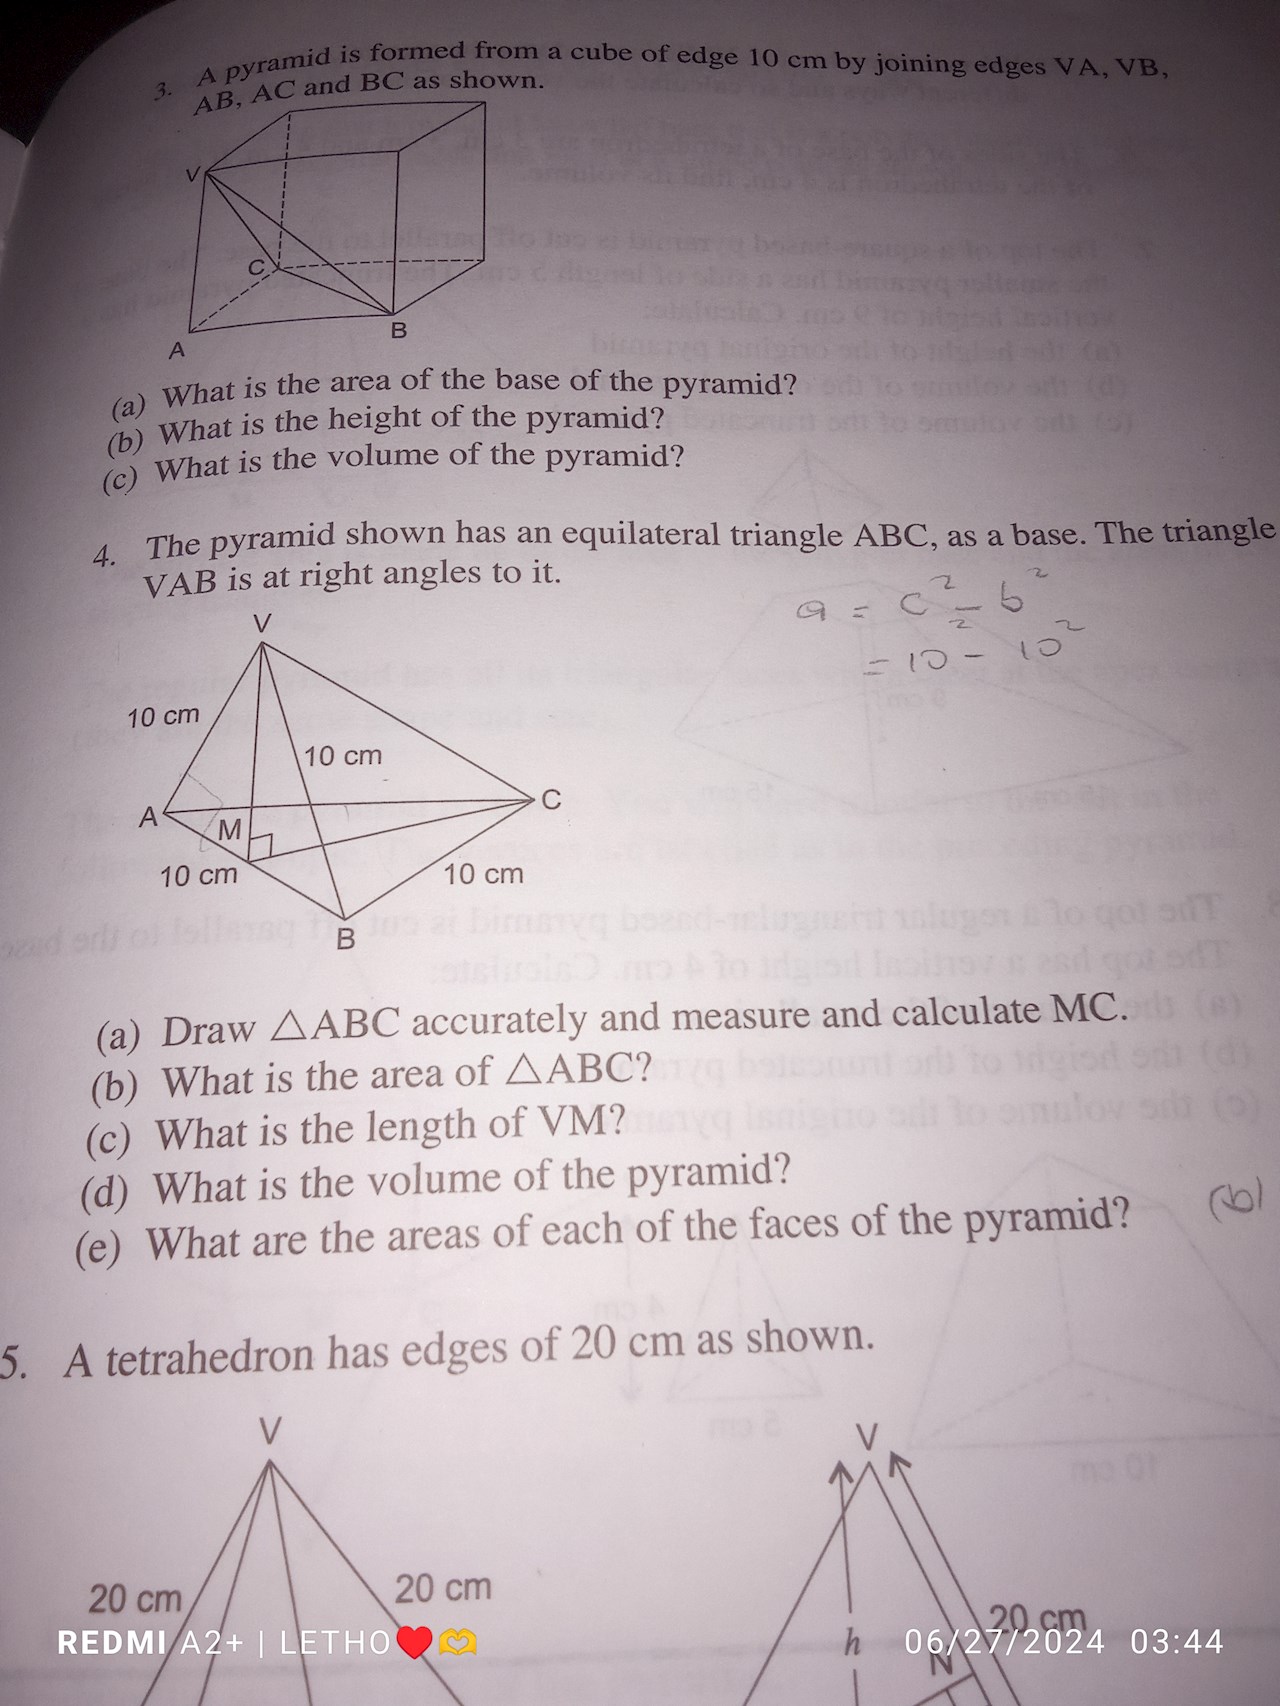 Draw∆ABC accurately and measure and calculate MC?